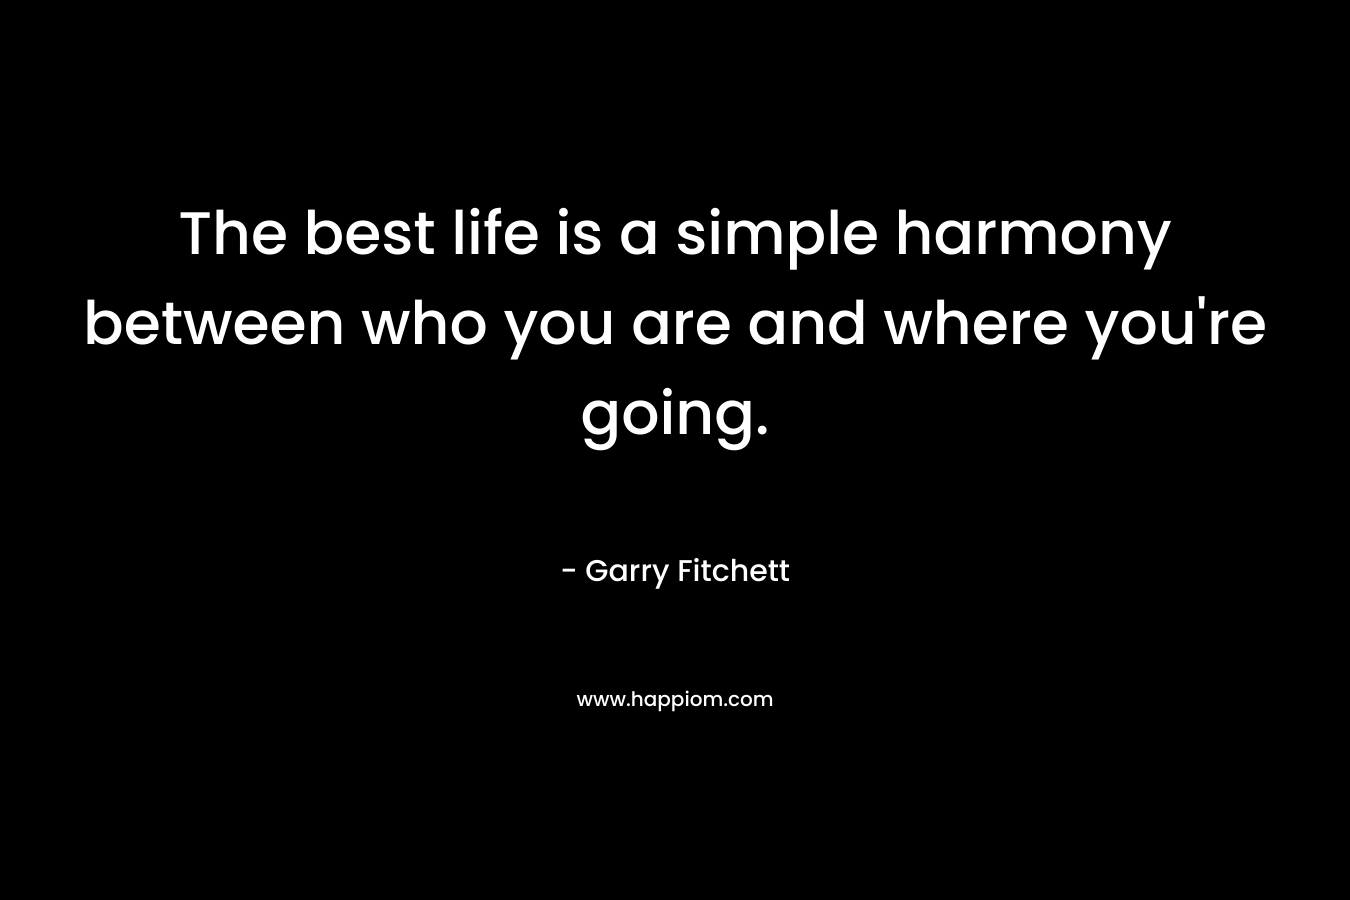 The best life is a simple harmony between who you are and where you’re going. – Garry Fitchett